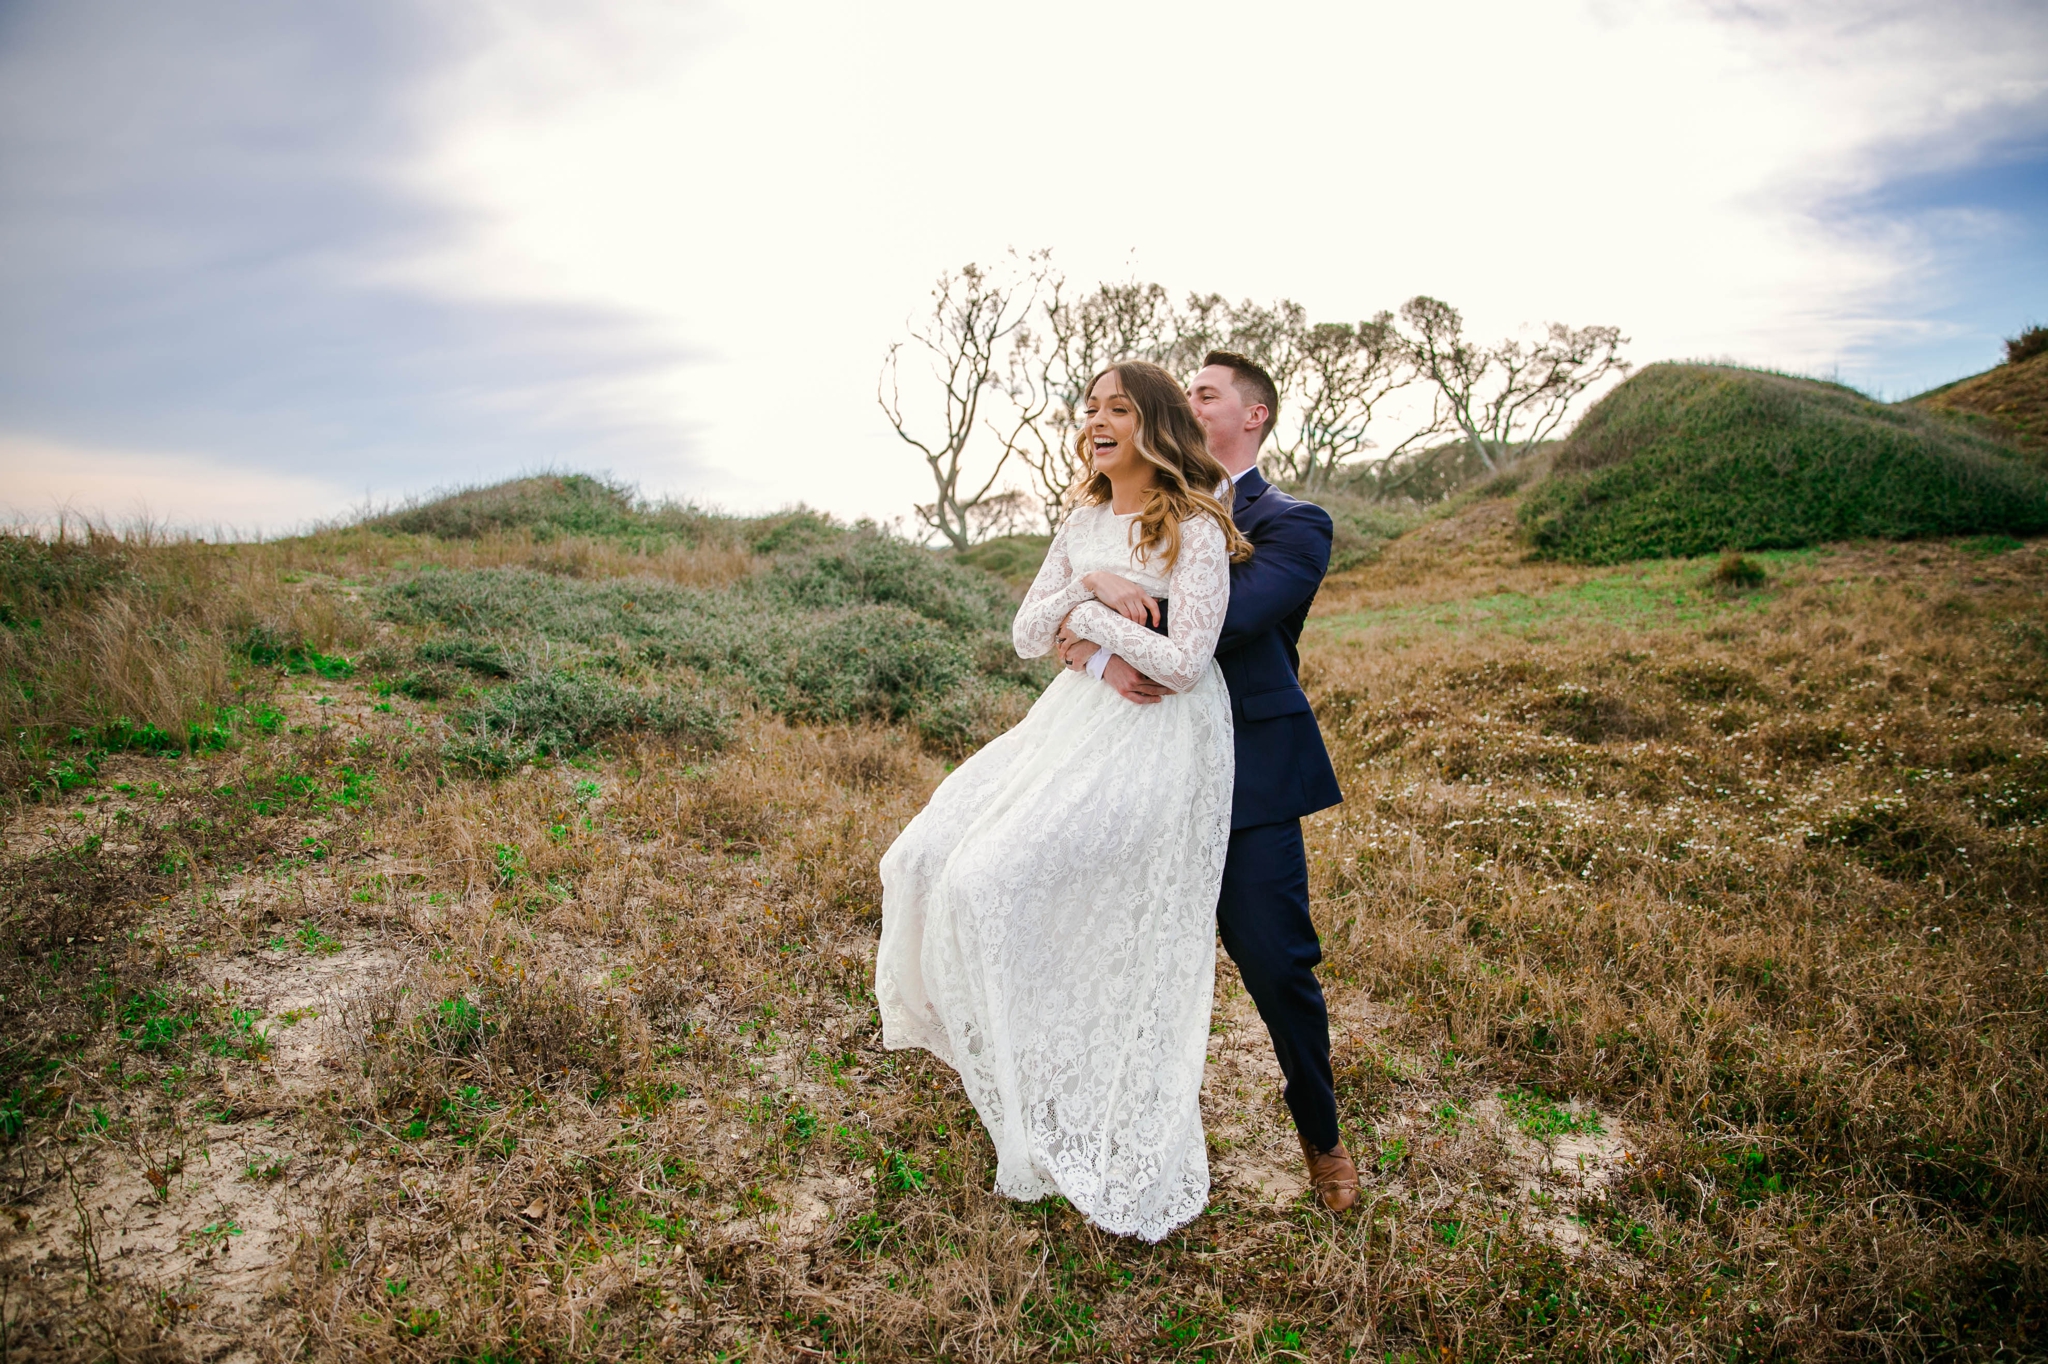 Groom swinging his bride around in Lush Green Grass - Beach Elopement Photography - wedding dress by asos with purple and pink flowers and navy suit - oahu hawaii wedding photographer